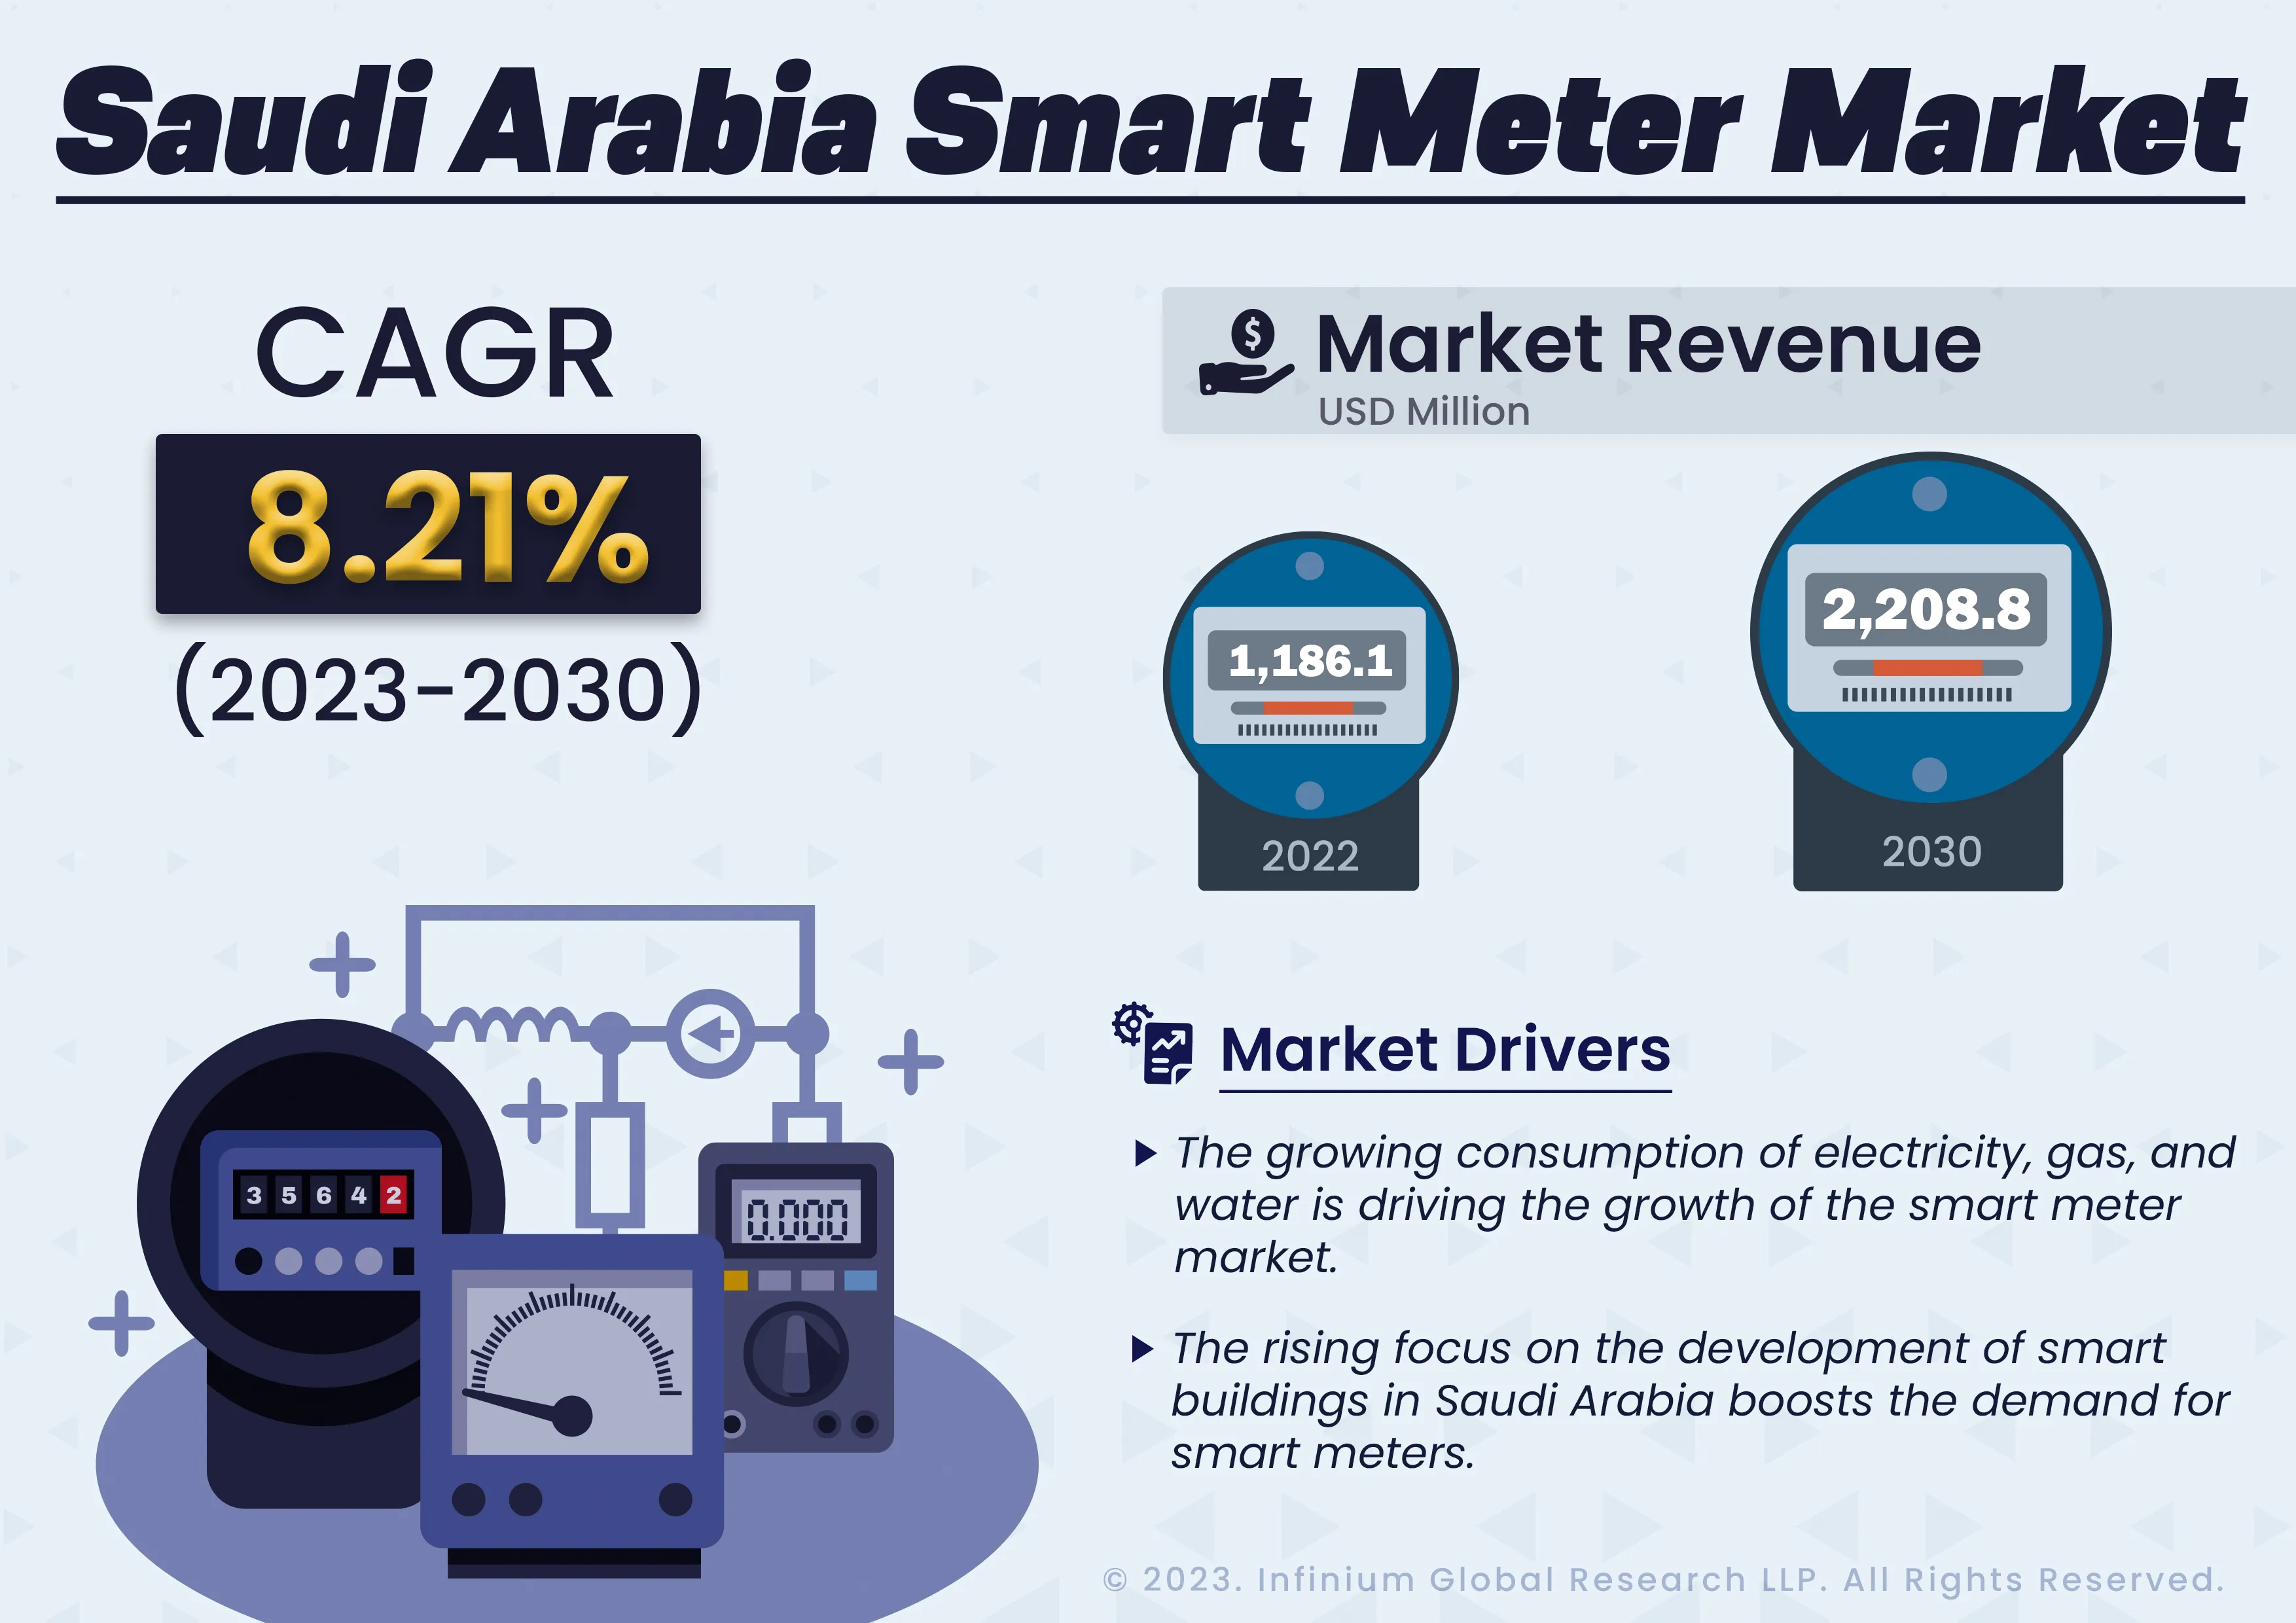 Infograph - Saudi Arabia Smart Meter Market was Valued at USD 1,186.1 Million in 2022 and